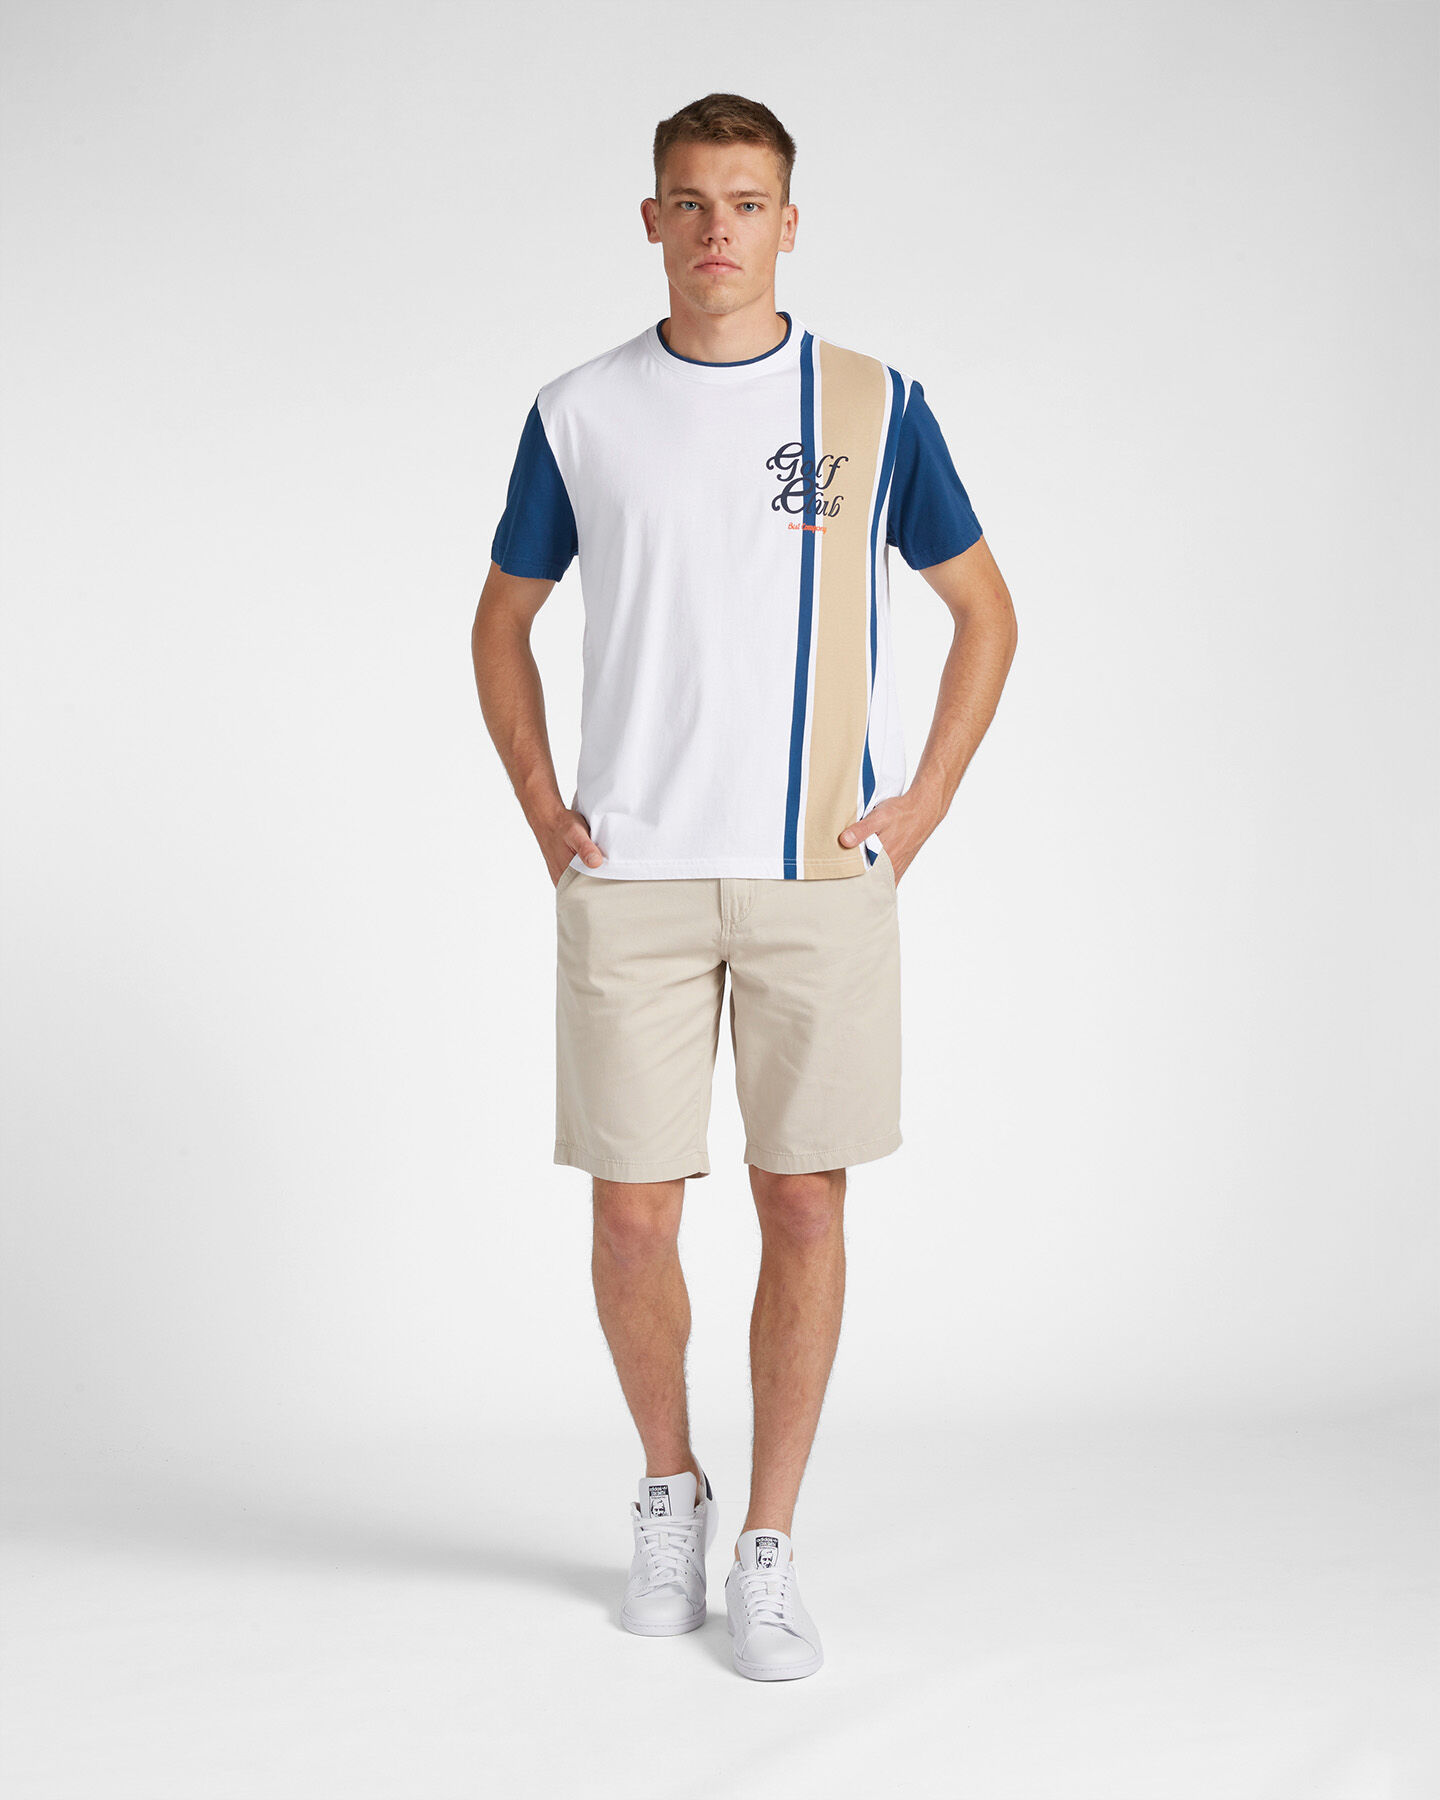  T-Shirt BEST COMPANY GOLF CLUB M S4122340|1040|S scatto 1